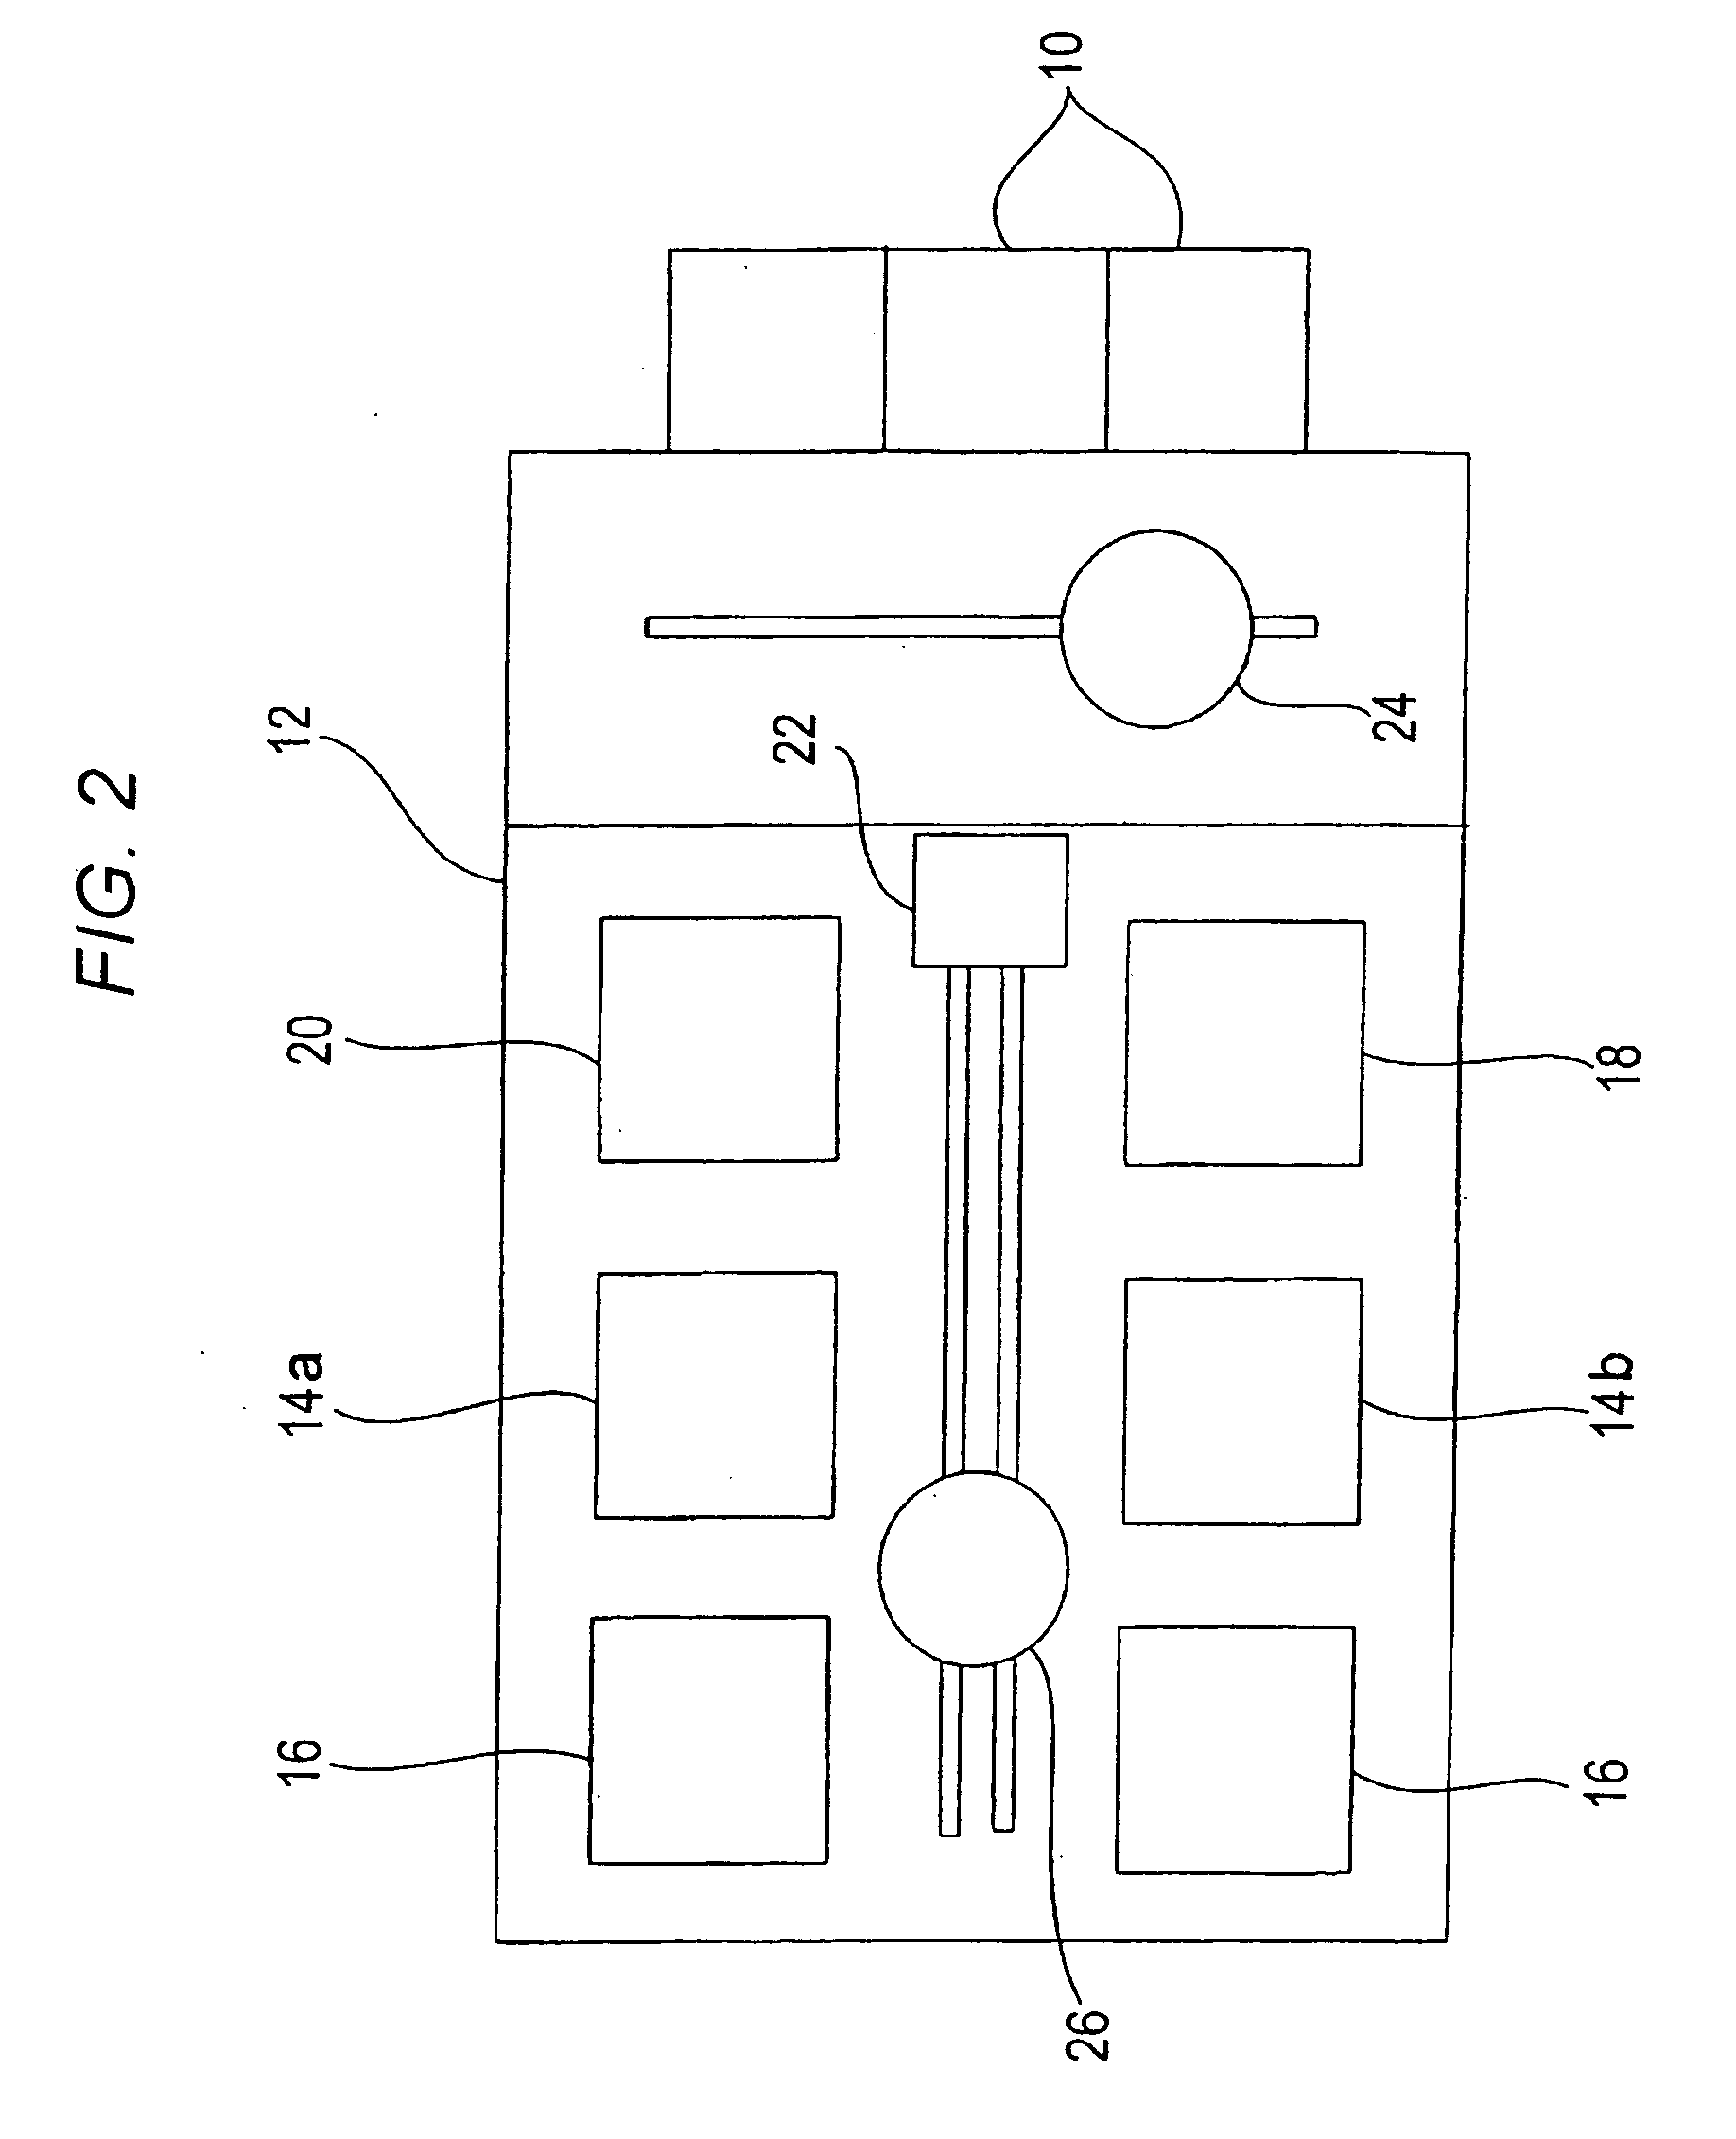 Electroless plating apparatus and plating solution